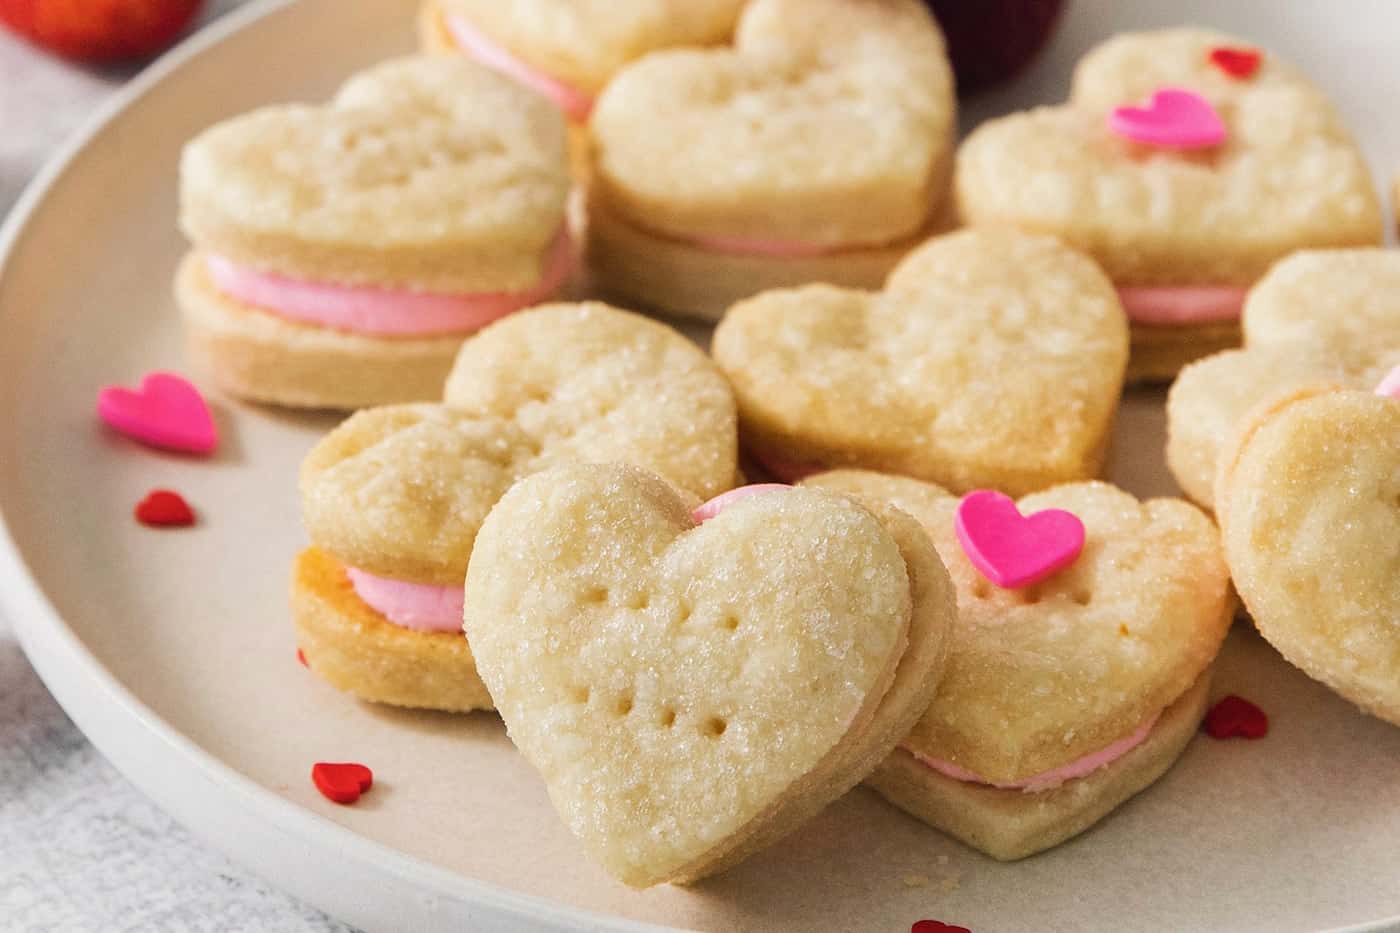 Heart-shaped strawberry cream wafer cookies are displayed on a white plate.